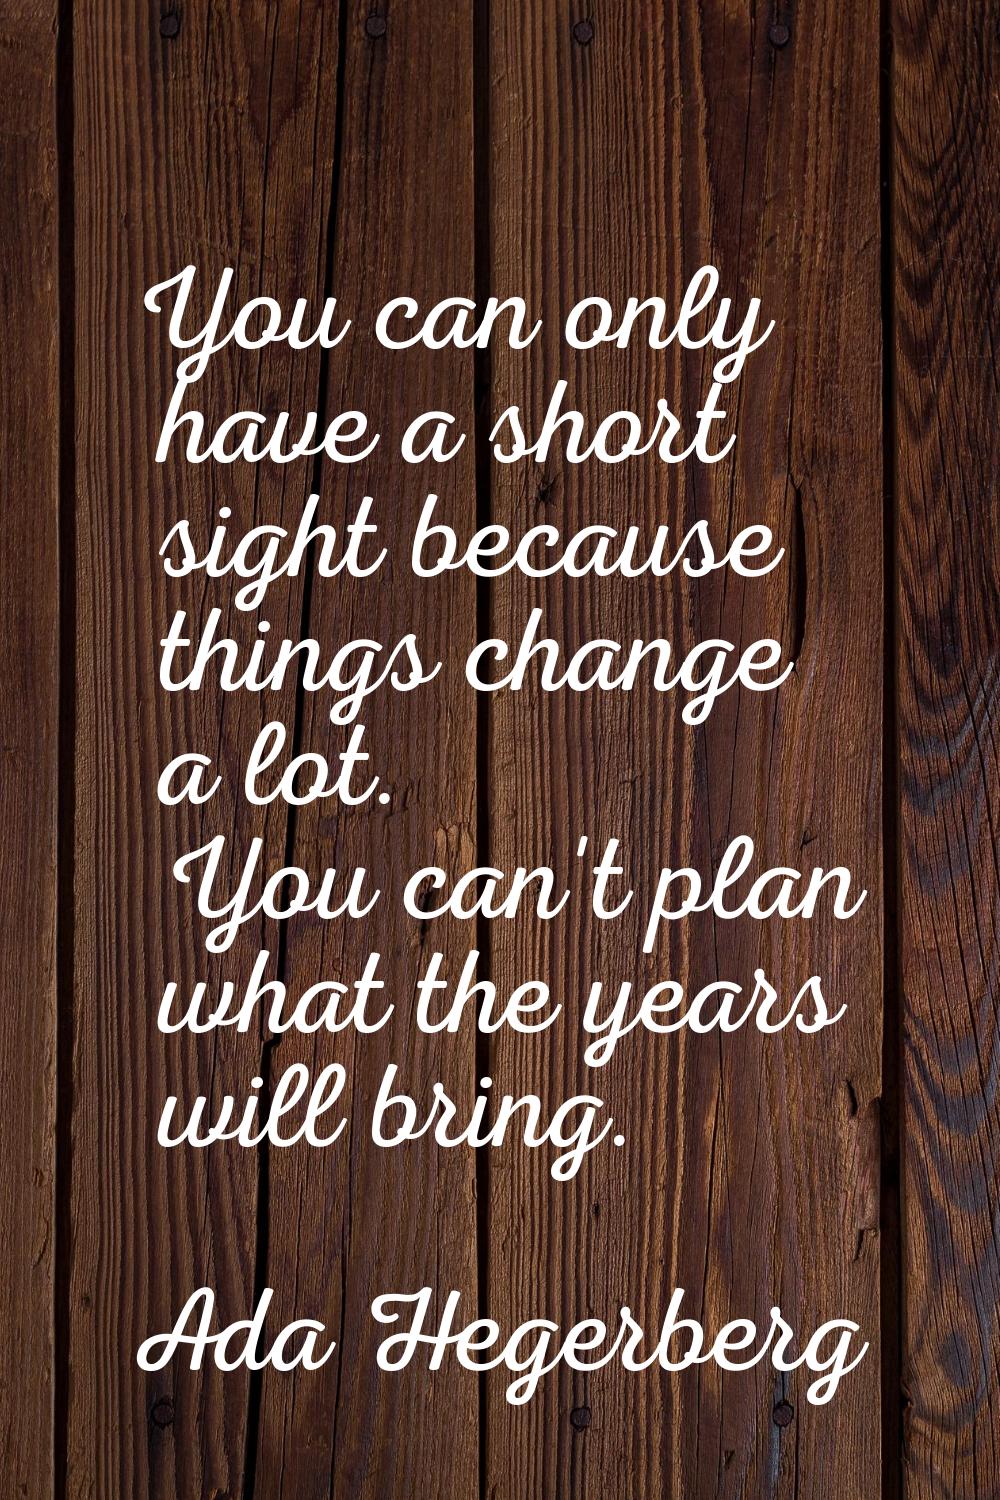 You can only have a short sight because things change a lot. You can't plan what the years will bri